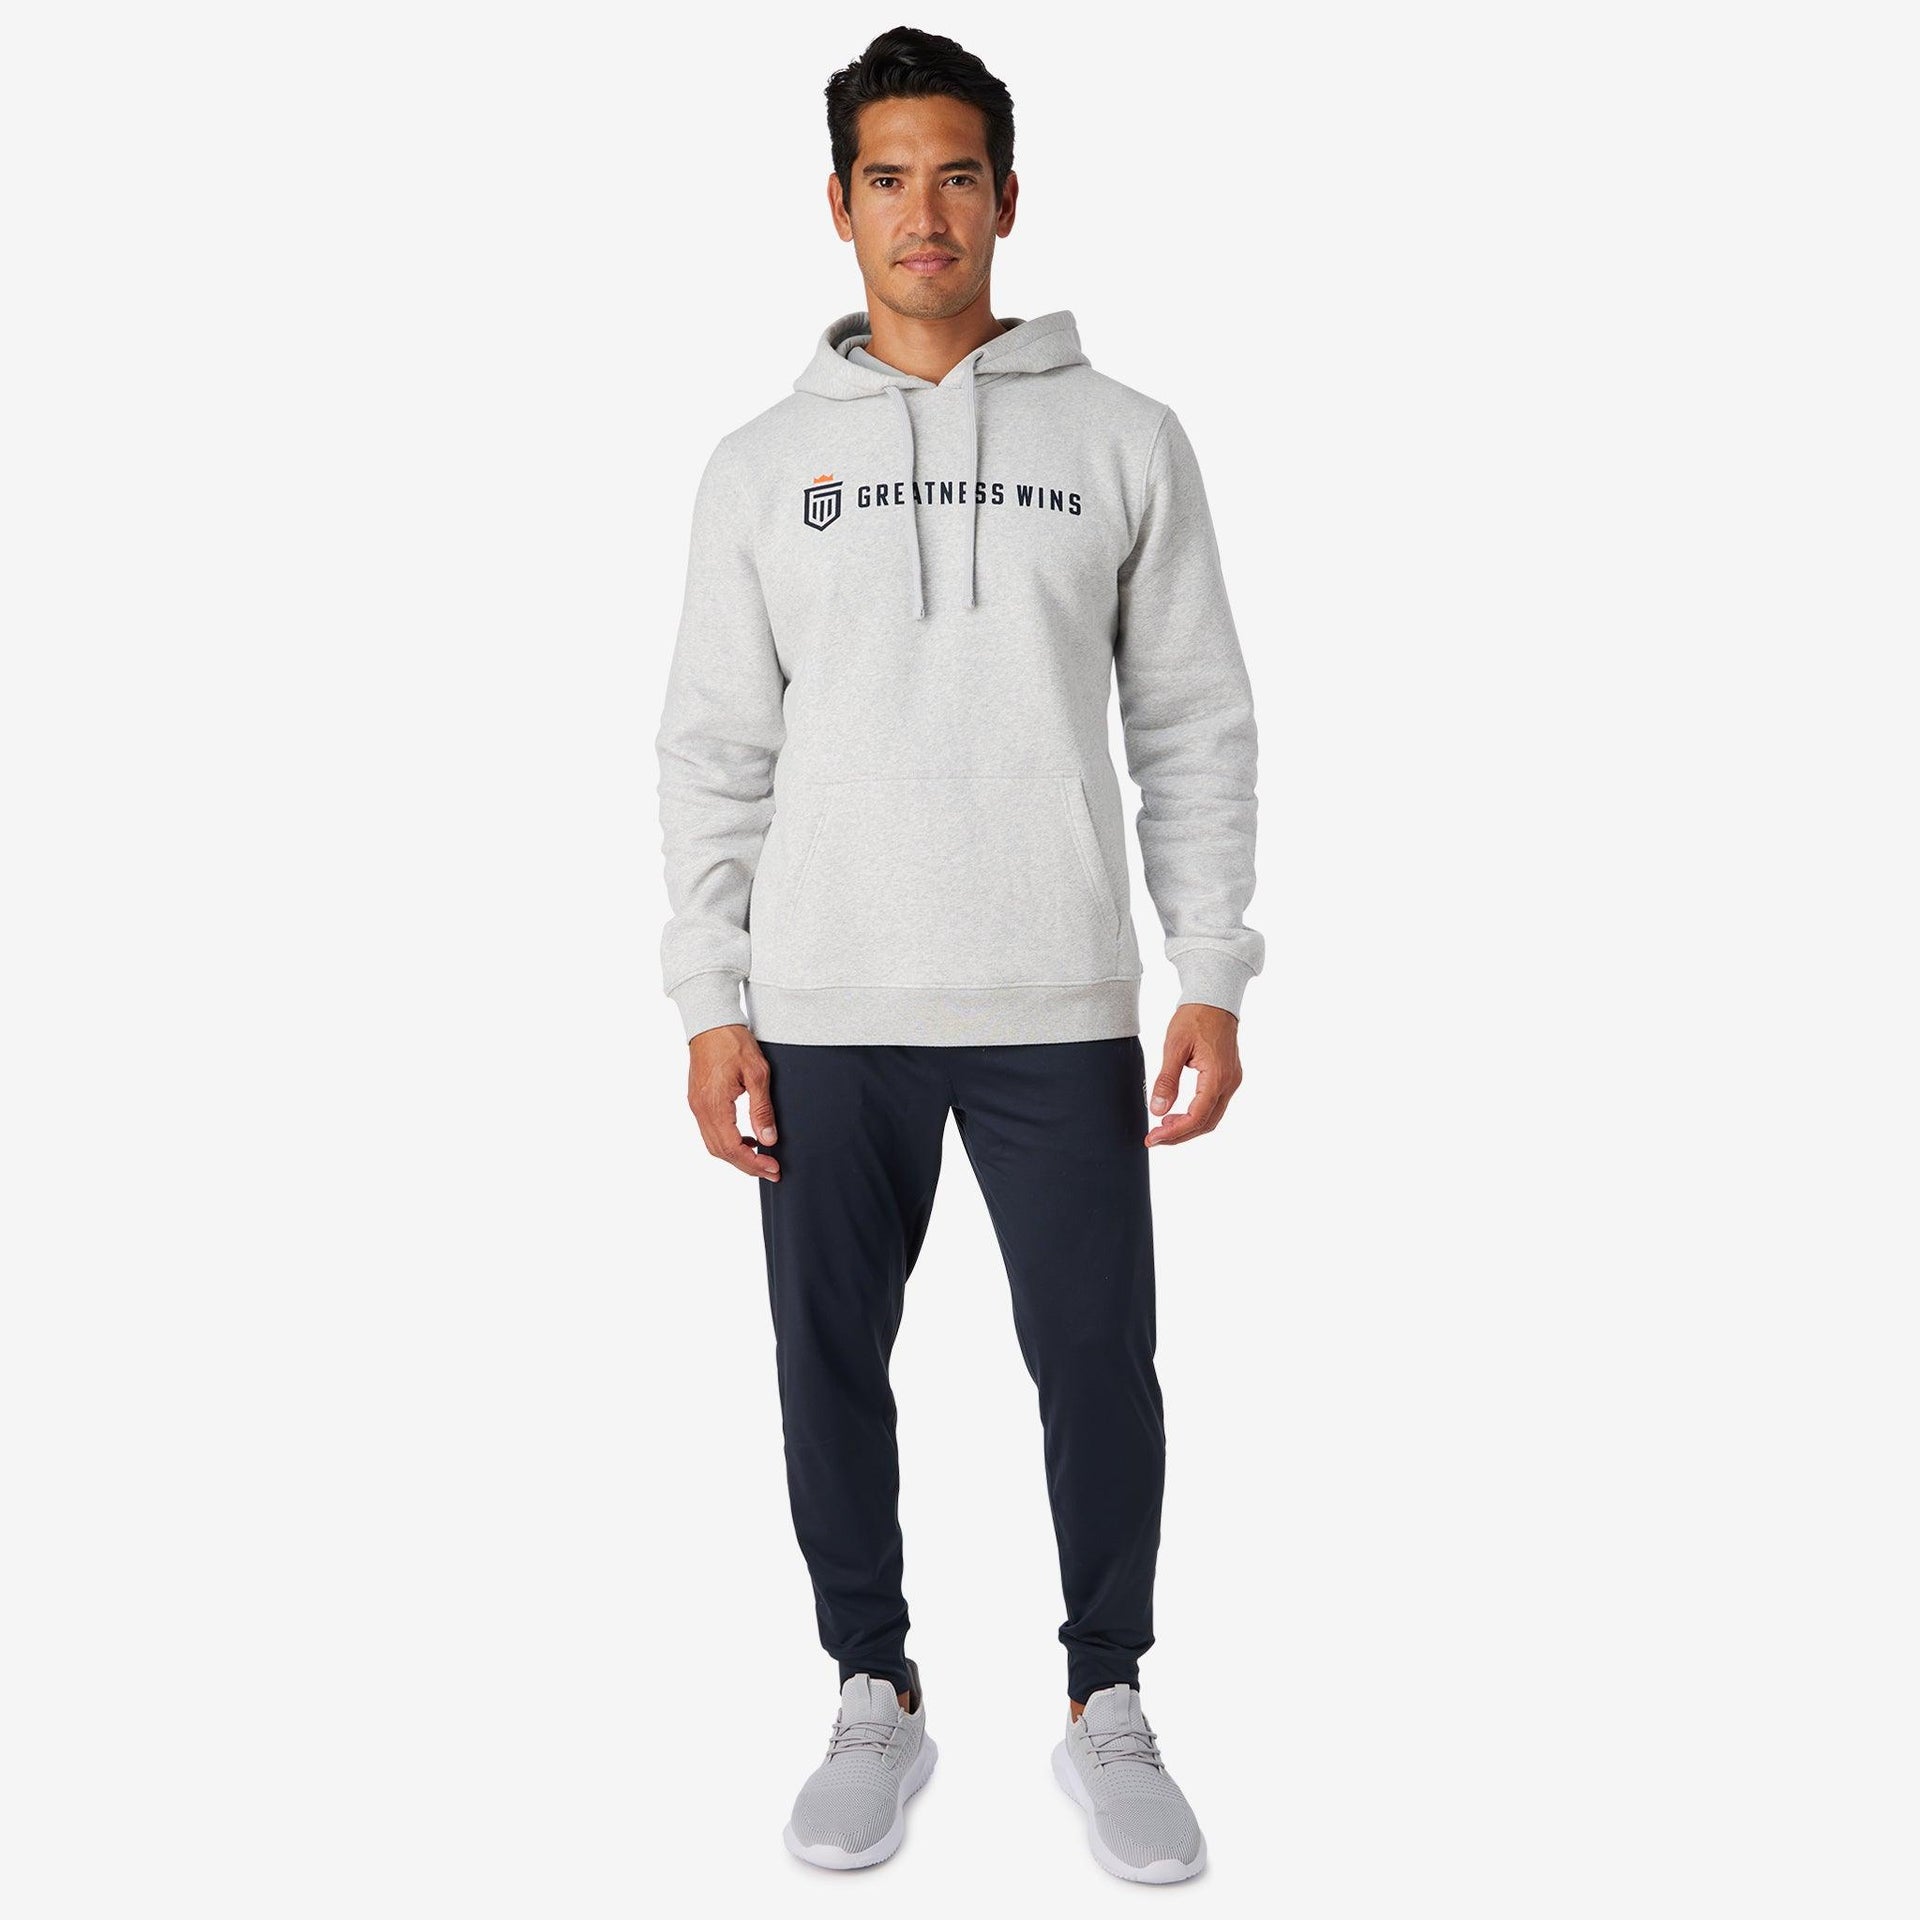 LOGO GRAPHIC HOODIE - Greatness Wins